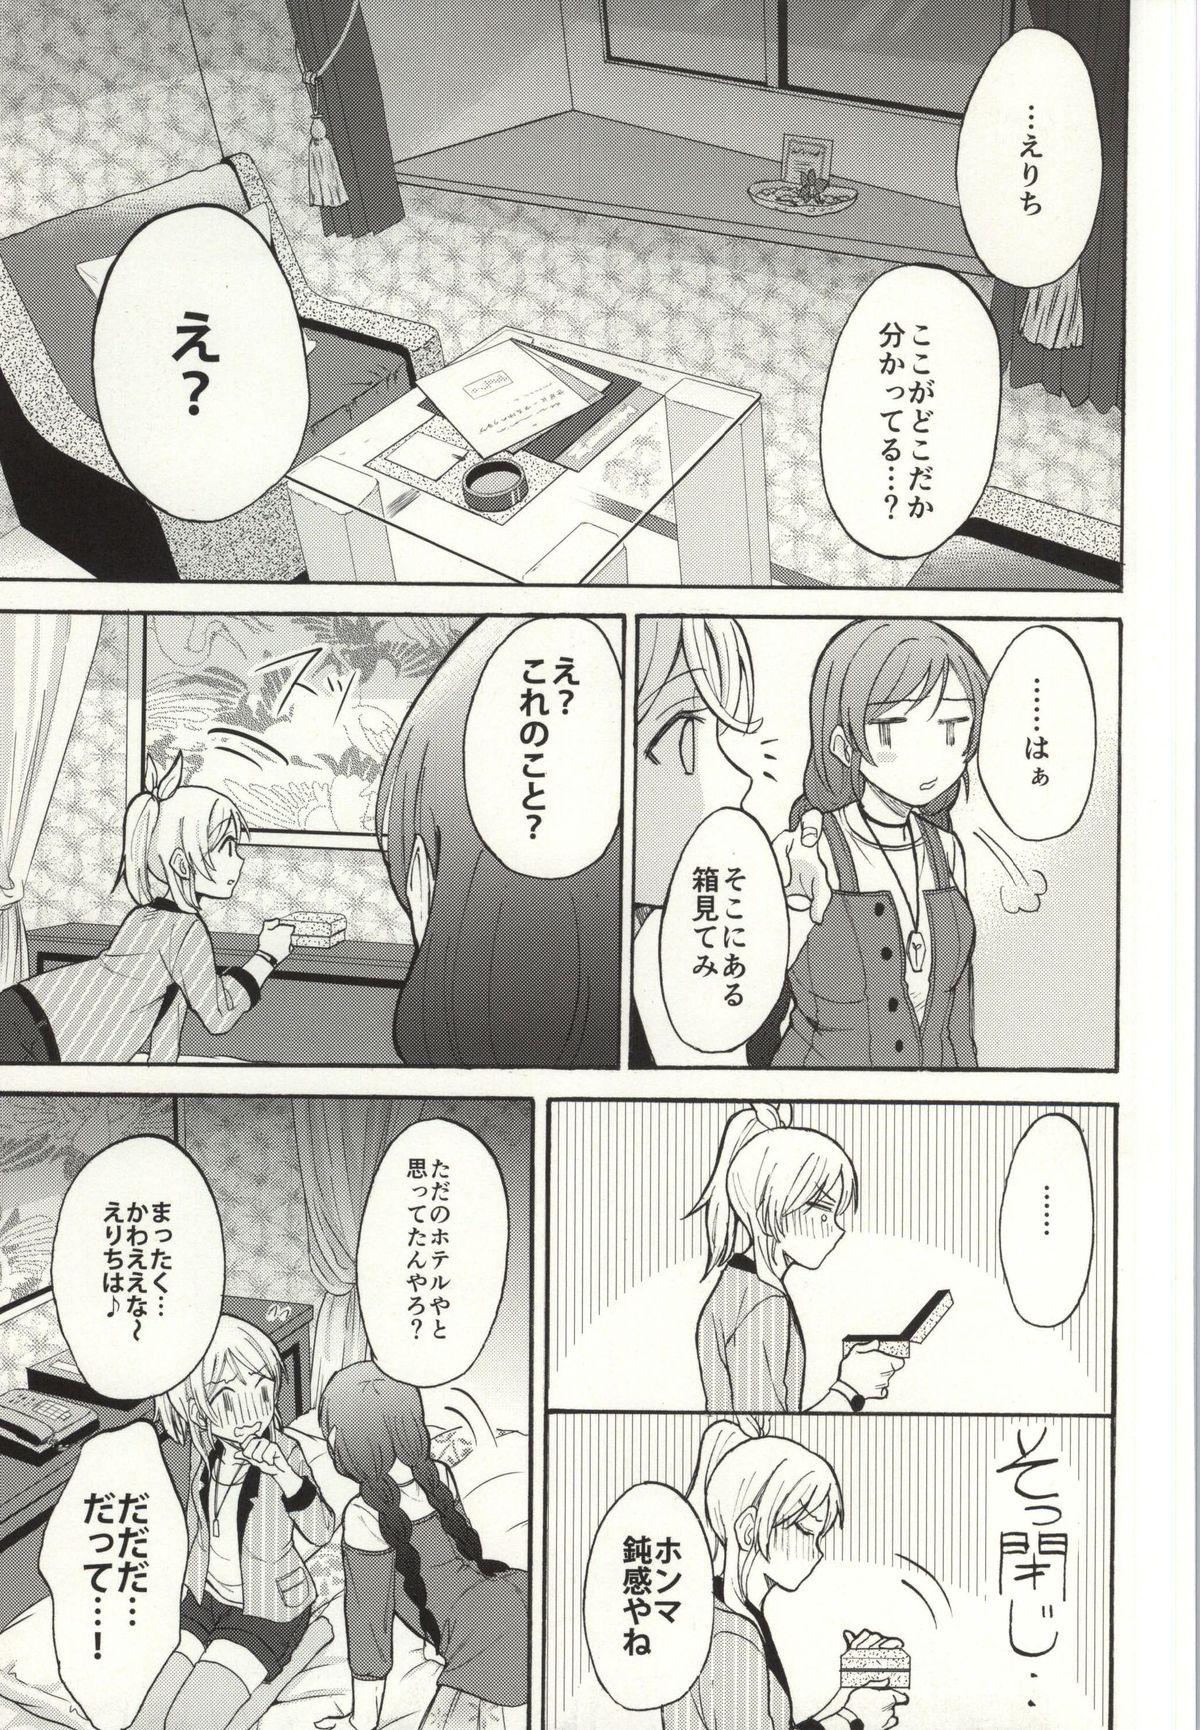 Female Dame Dame! My Darling - Love live Sofa - Page 7